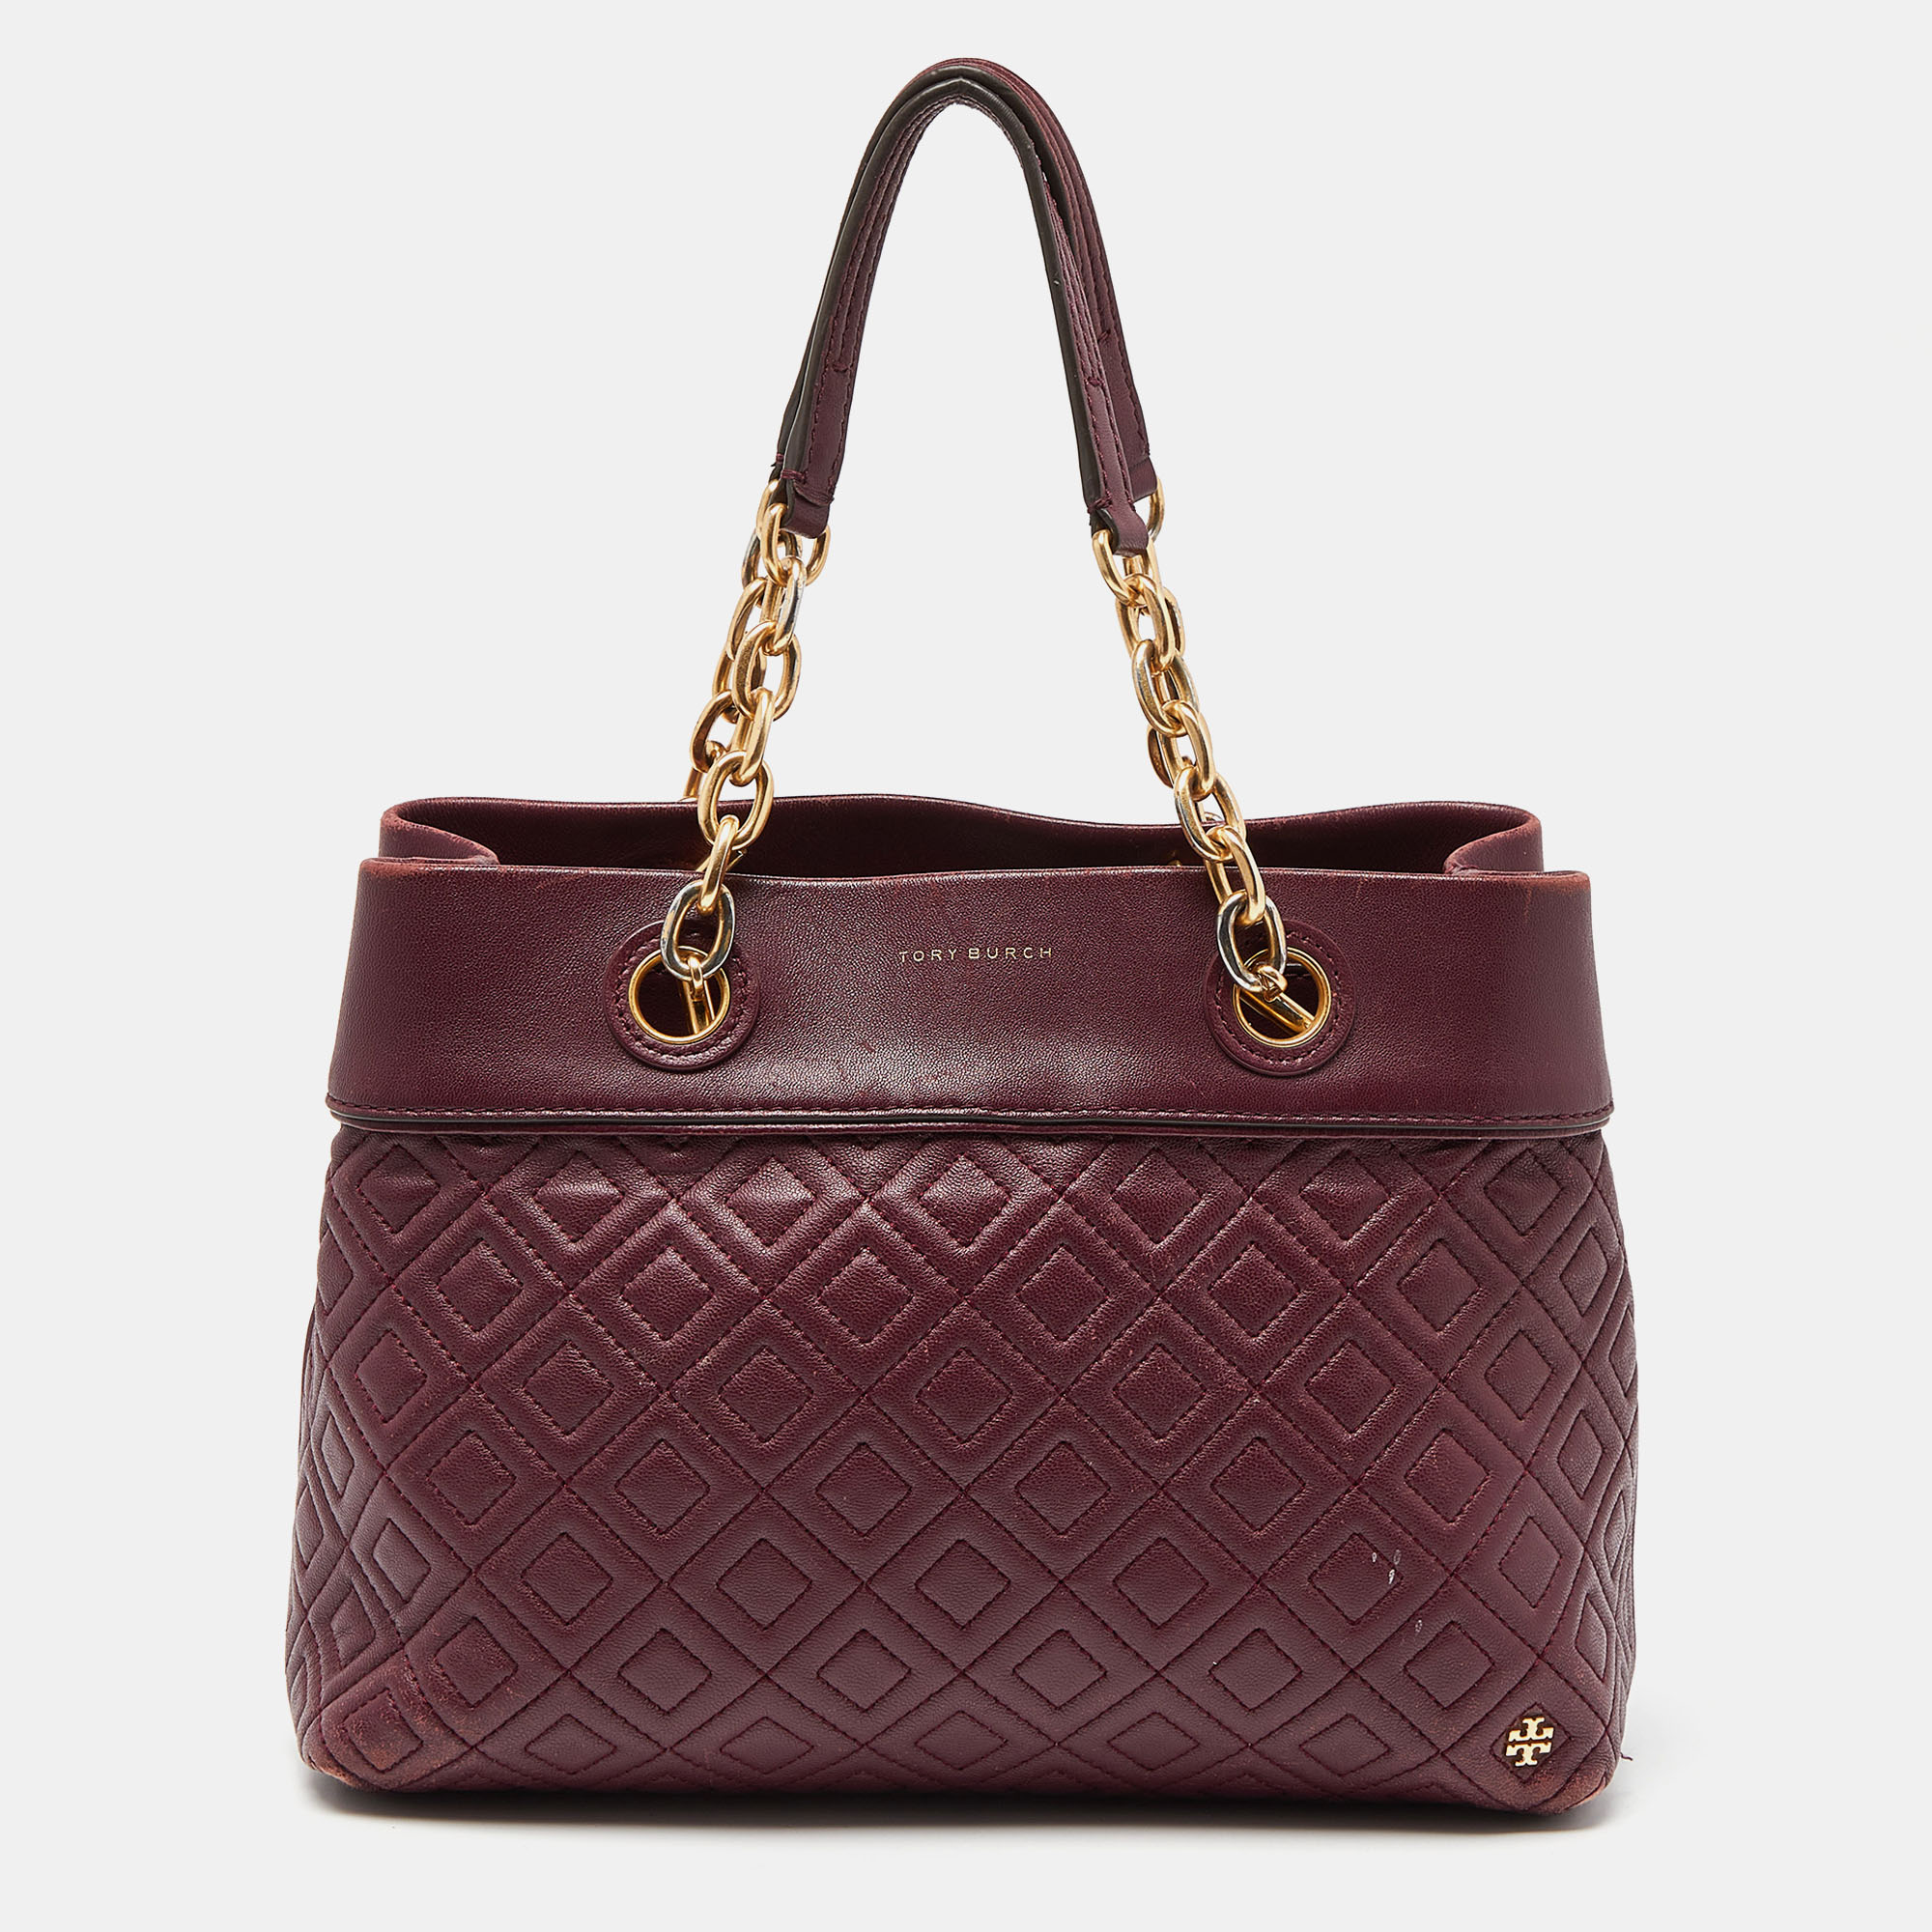 Pre-owned Tory Burch Burgundy Quilted Leather Fleming Satchel